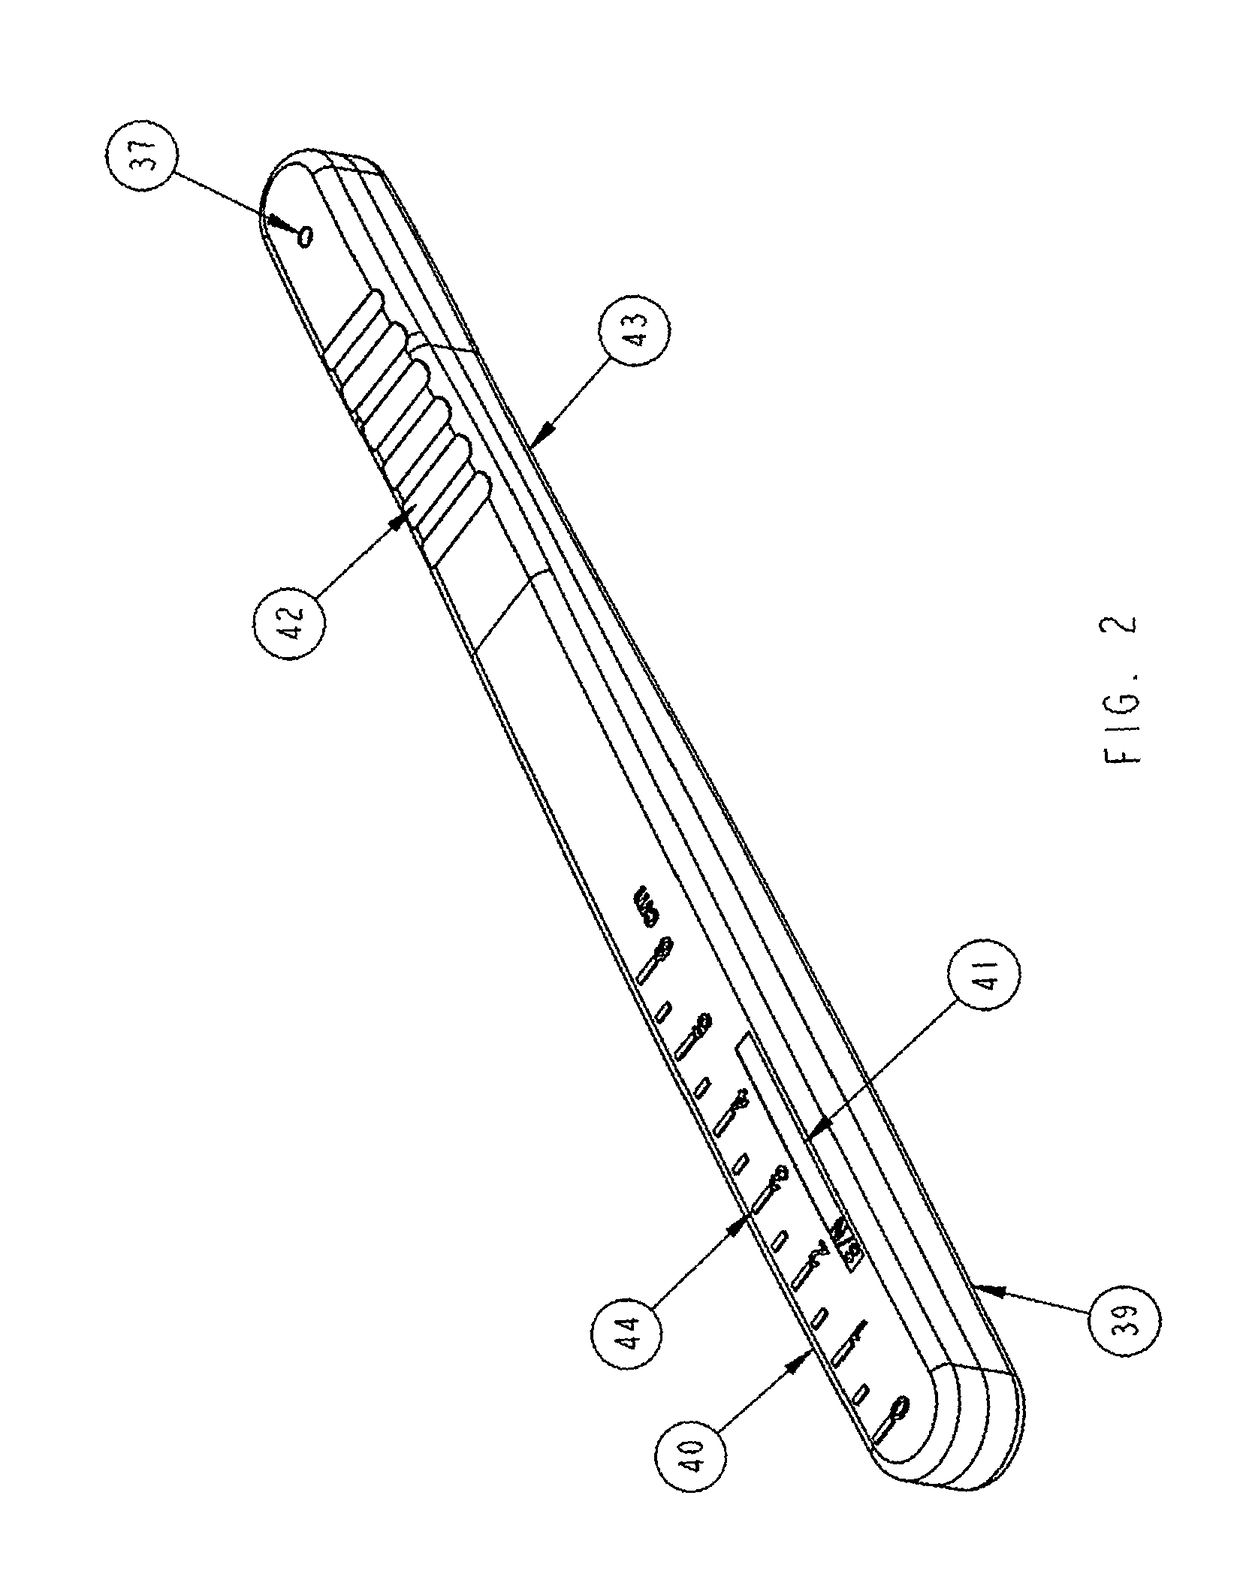 Surgical scalpel handle assembly system and method for requiring a verification process performed prior to and during surgery using actuators to unlock and engage blade holder in ready for cutting position